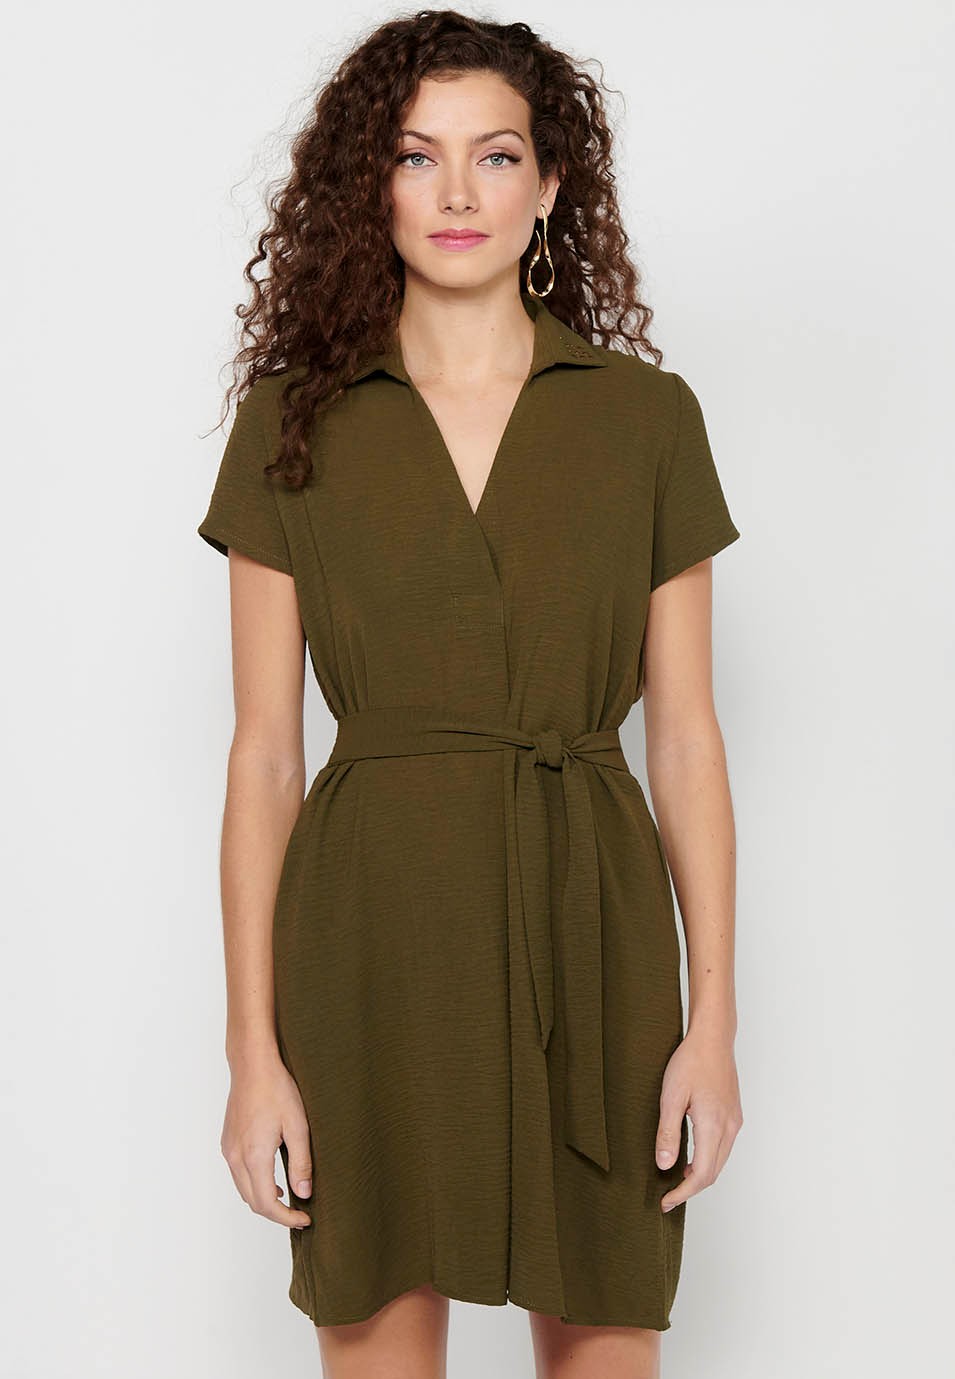 Khaki Short Sleeve Dress with V-Neck and Tight Waist for Women 2